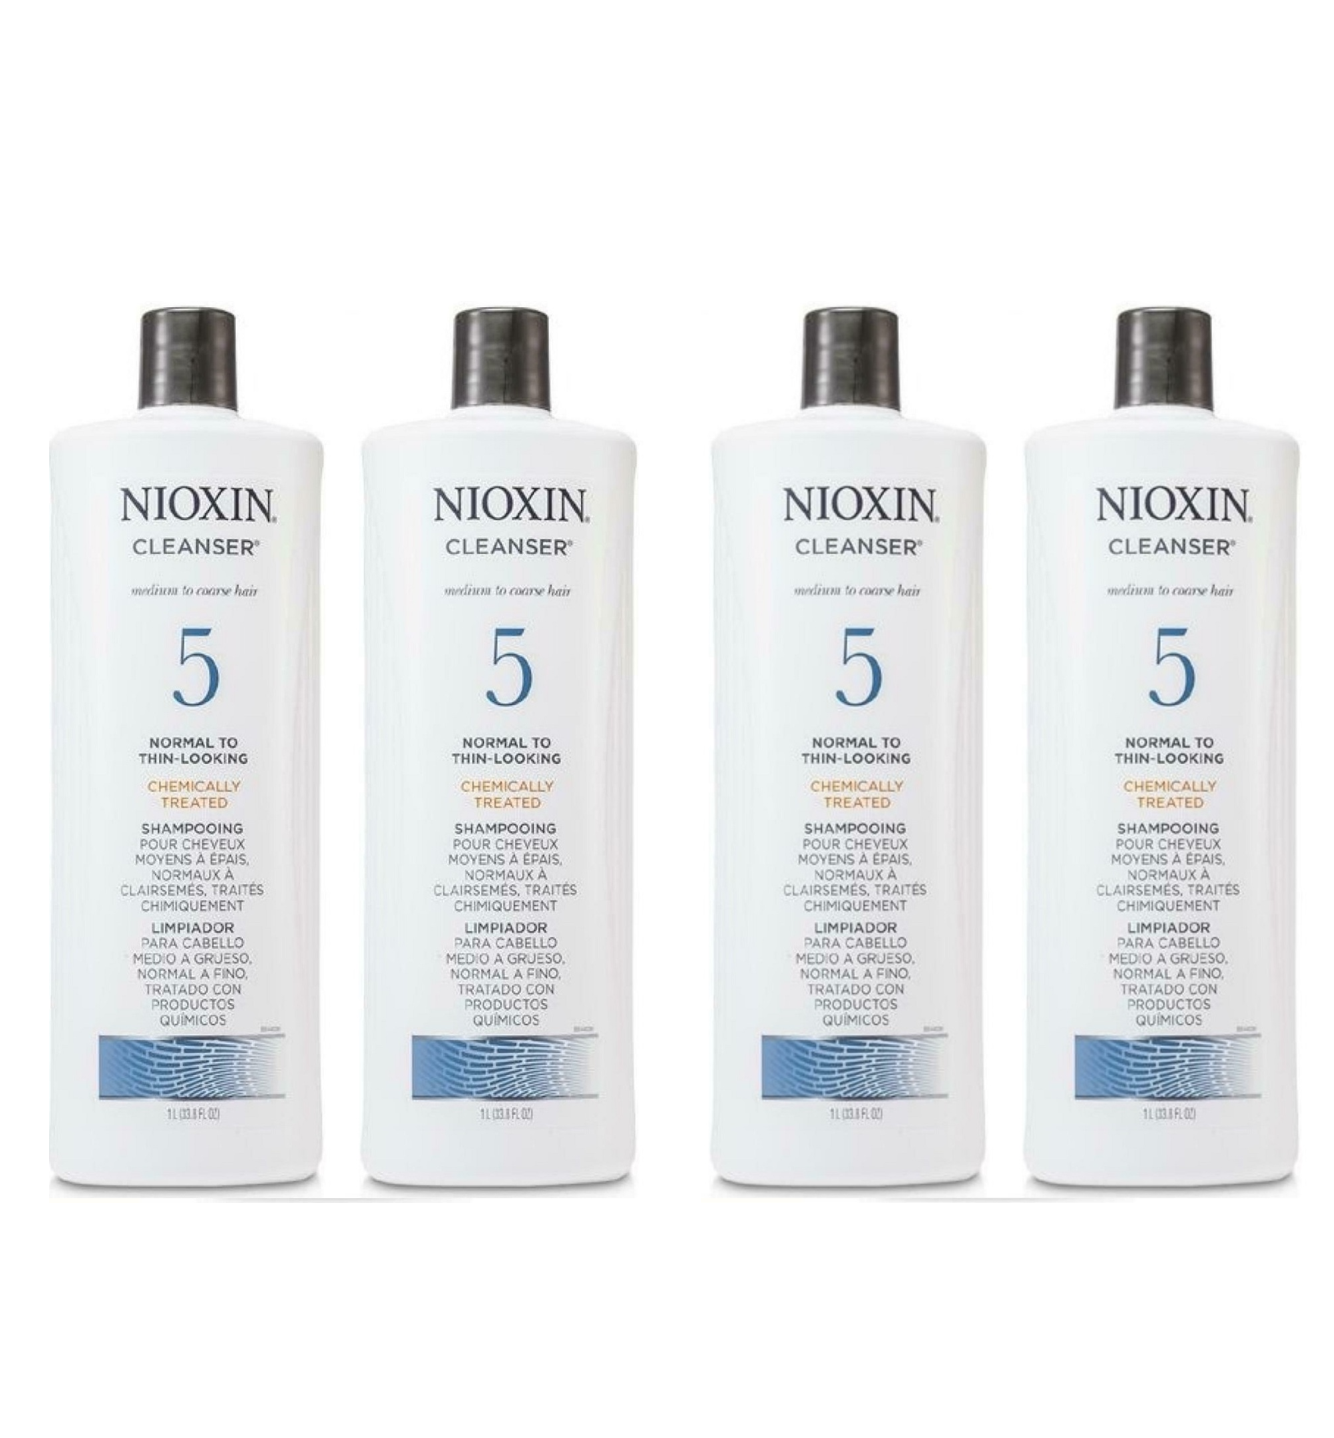 Primary image for NIOXIN System 5 Cleanser Shampoo 33.8oz (Pack of 4)